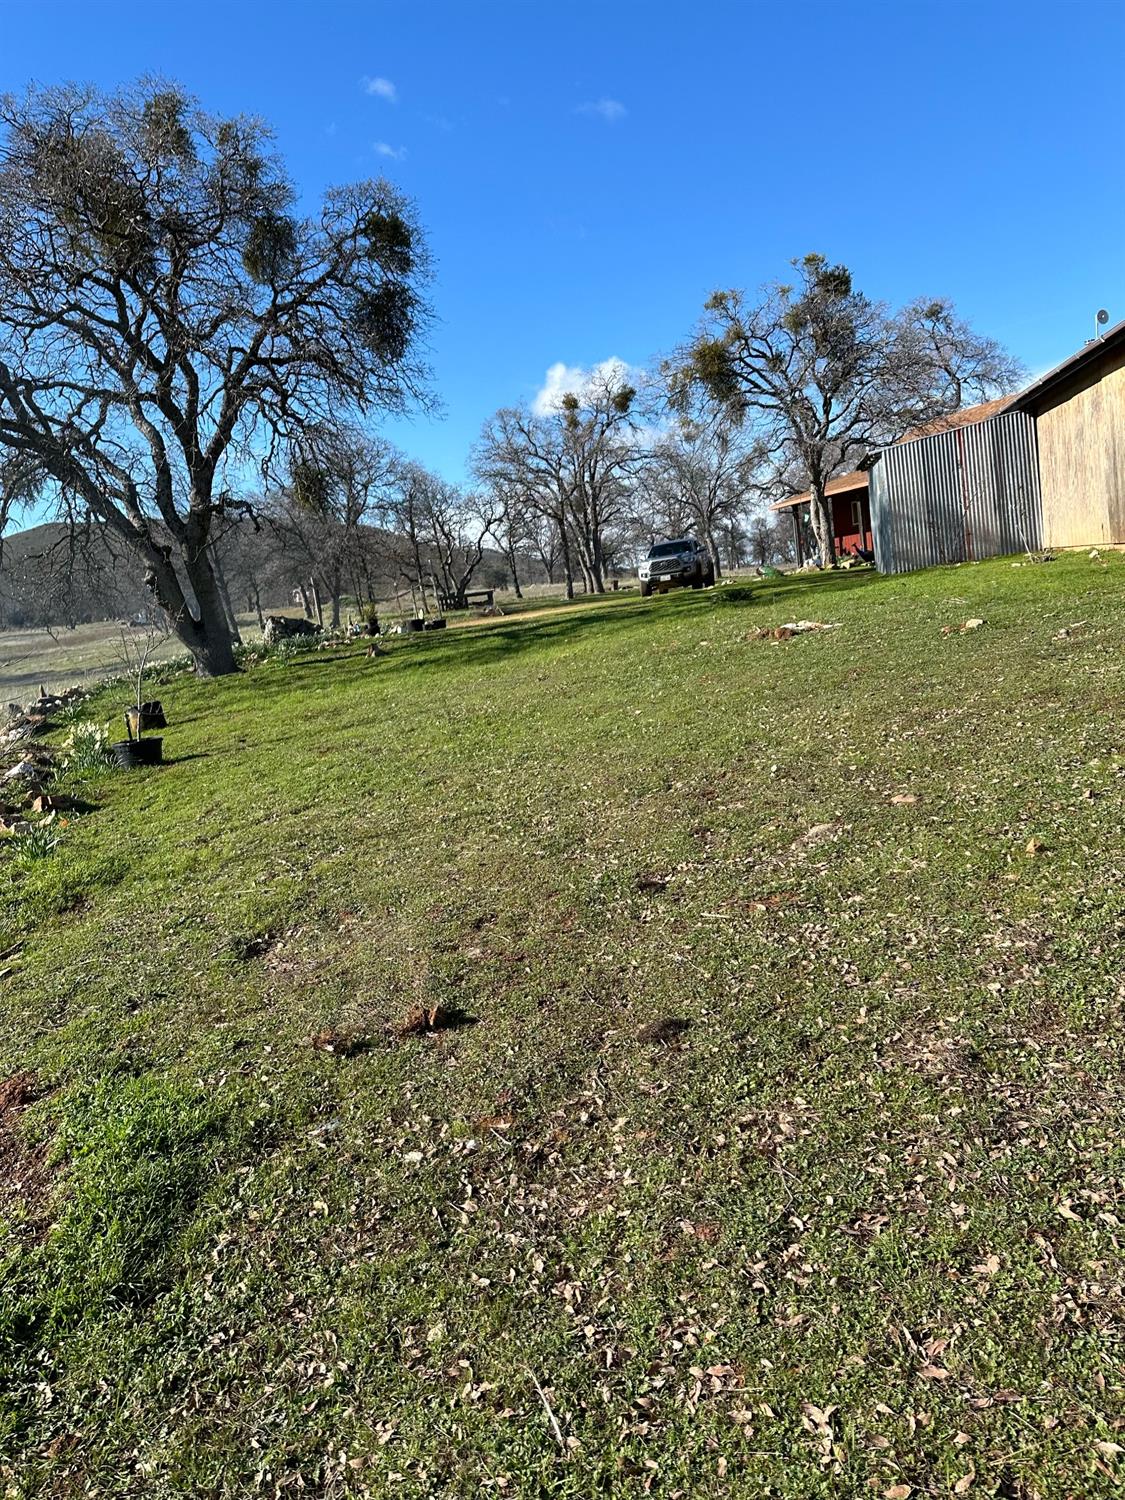 Photo of 4745 Bear Valley Rd in Mariposa, CA